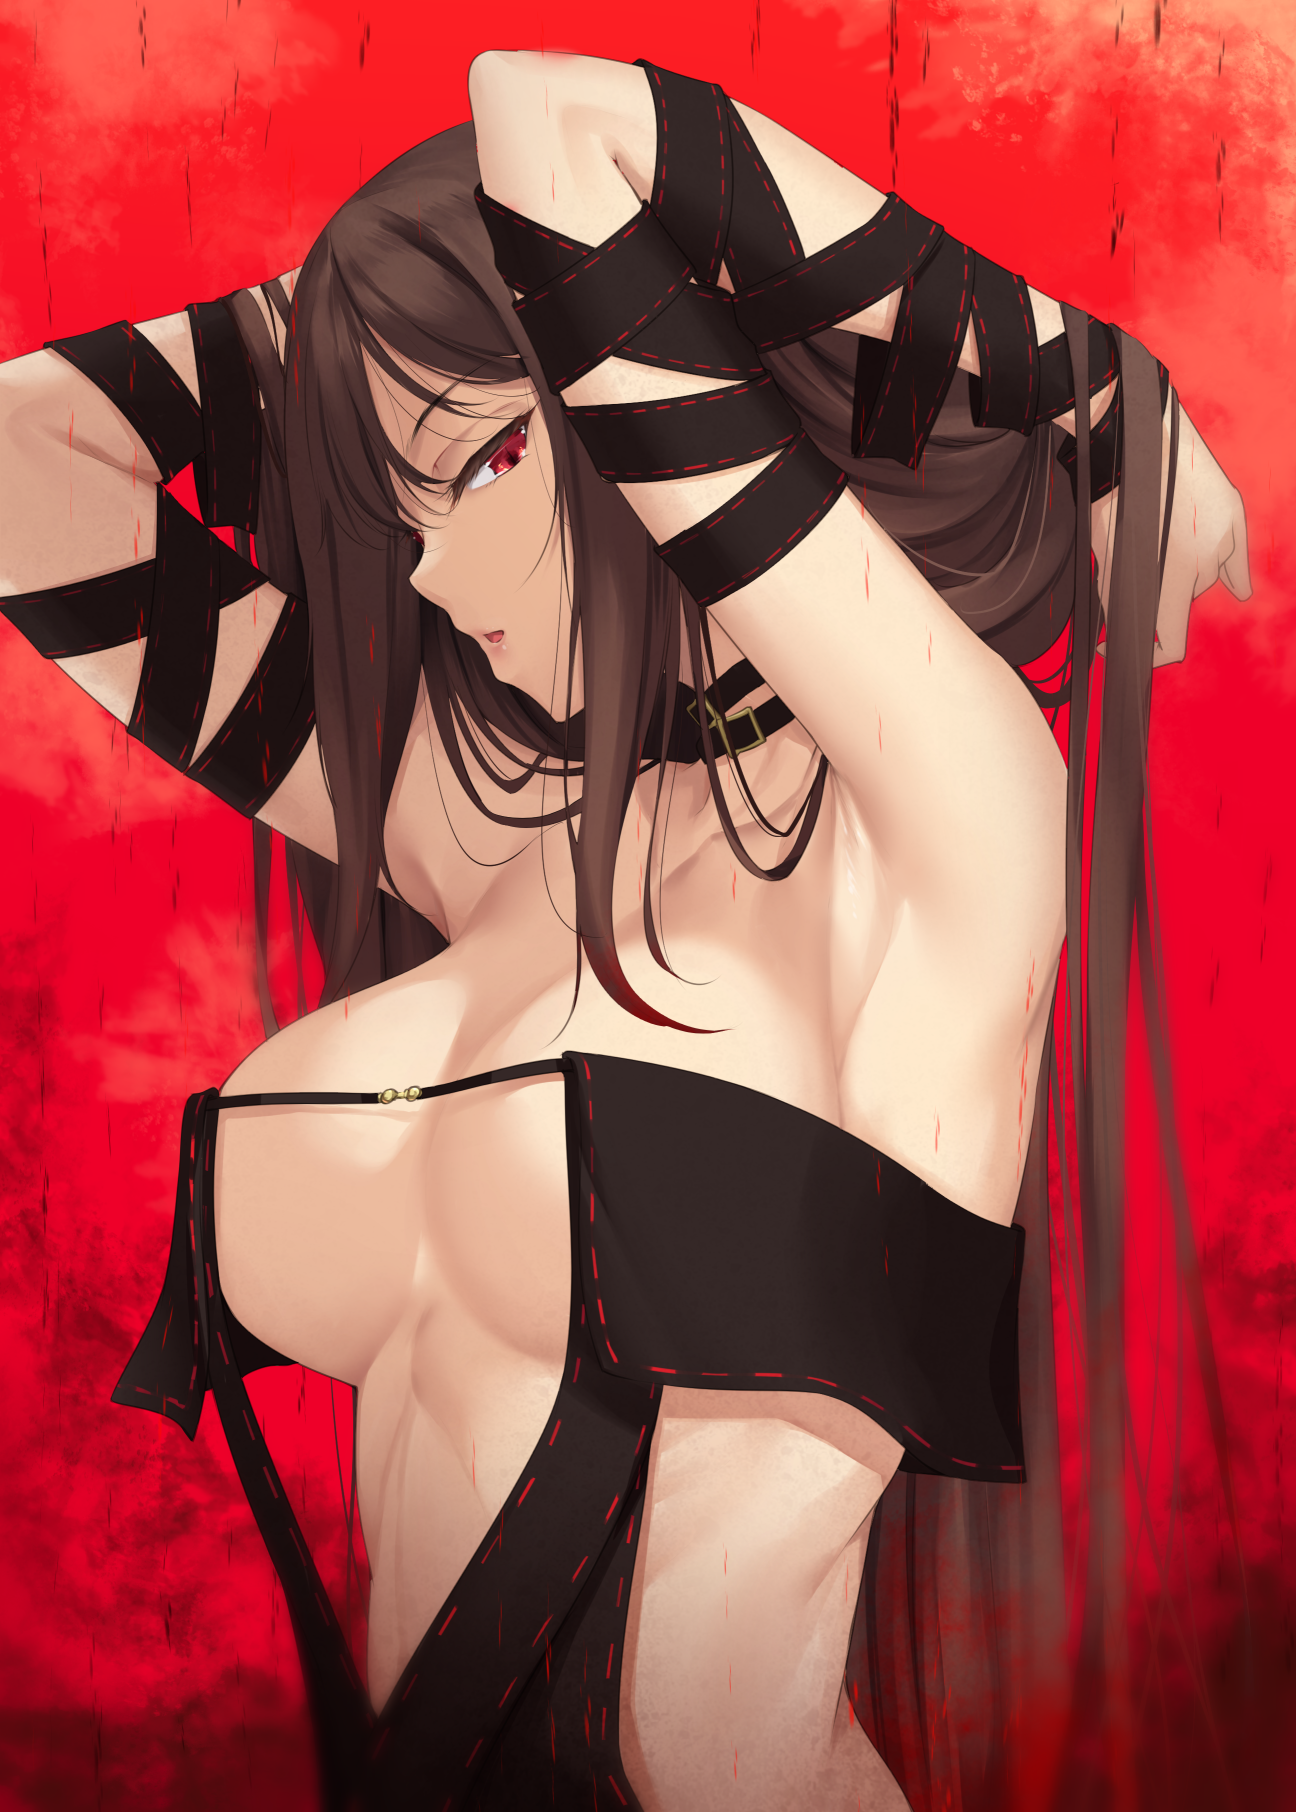 Anime 1296x1812 anime girls anime Fate/Grand Order boobs big boobs red background red eyes brunette dress cleavage Fate series Consort Yu (Fate/Grand Order) Nakano Sora